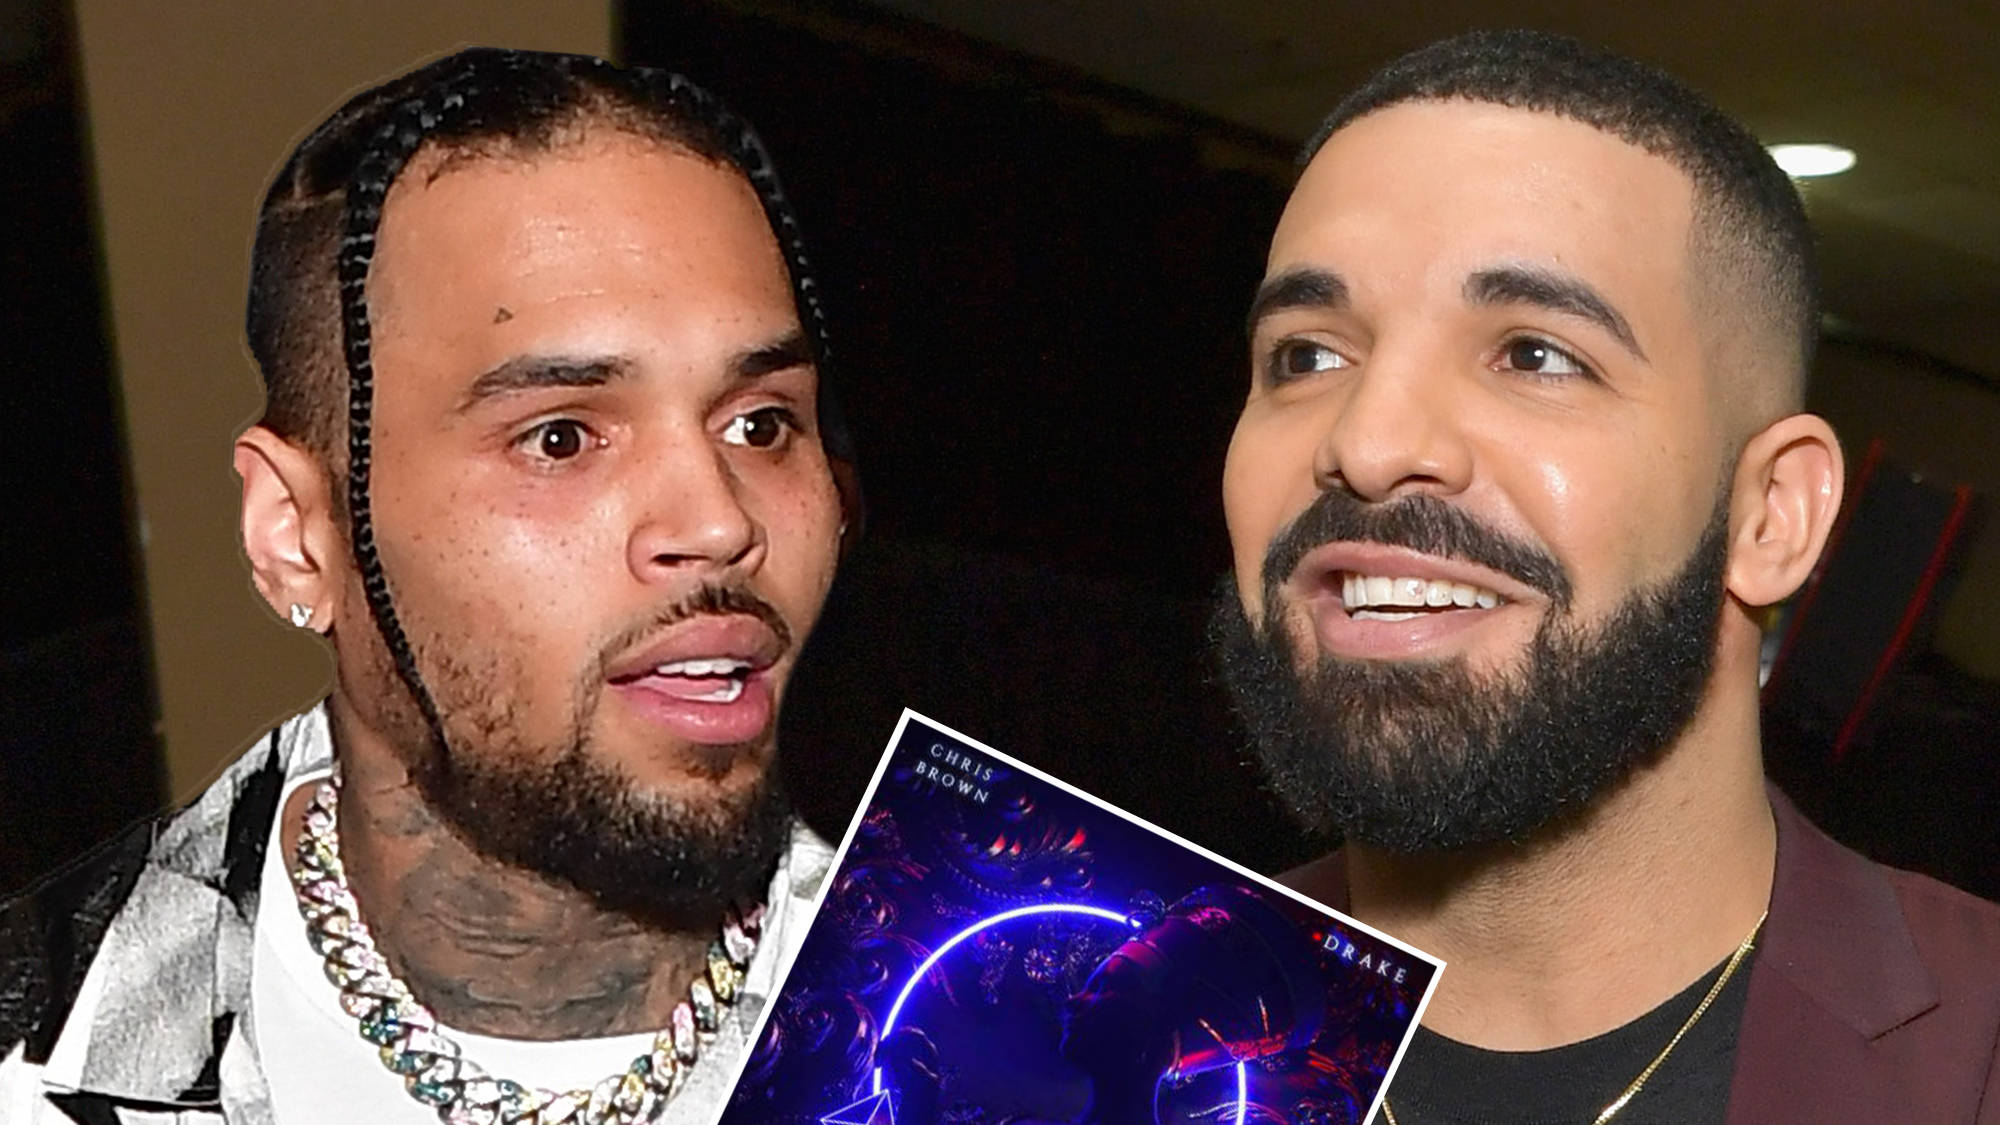 Chris Brown And Drake Fans Are Divided Over Their New